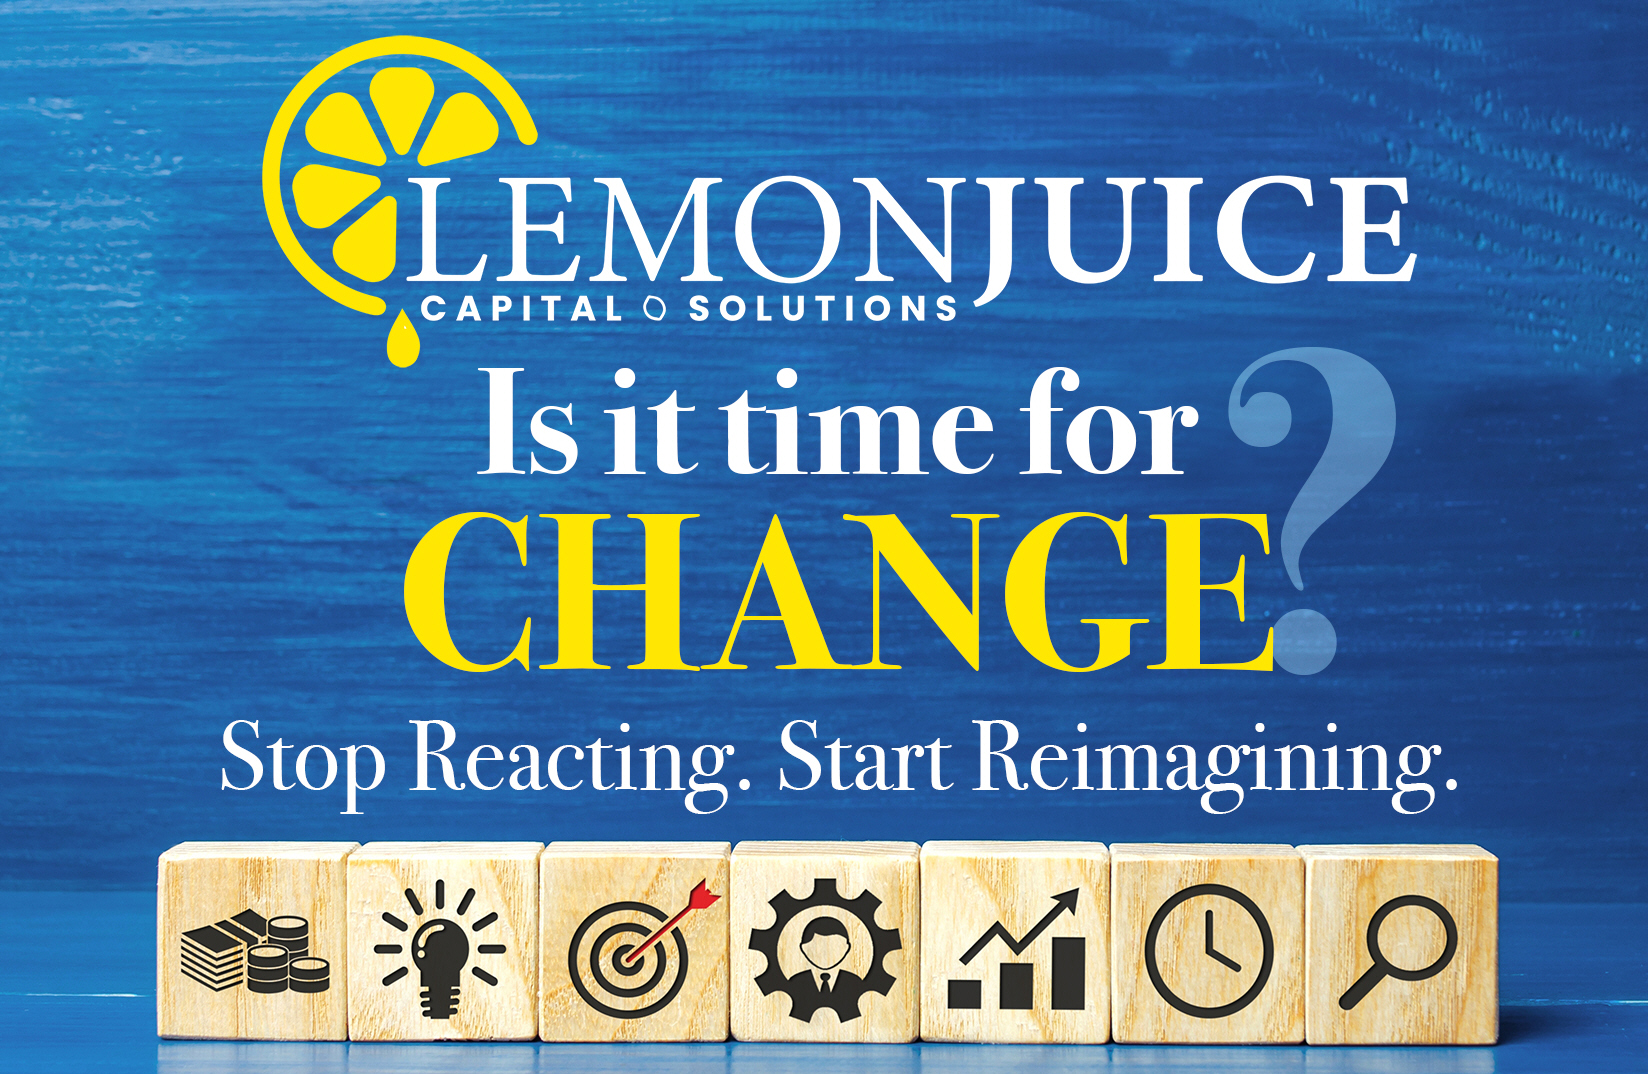 Lemonjuice Announces Record-Breaking Growth and Promotions